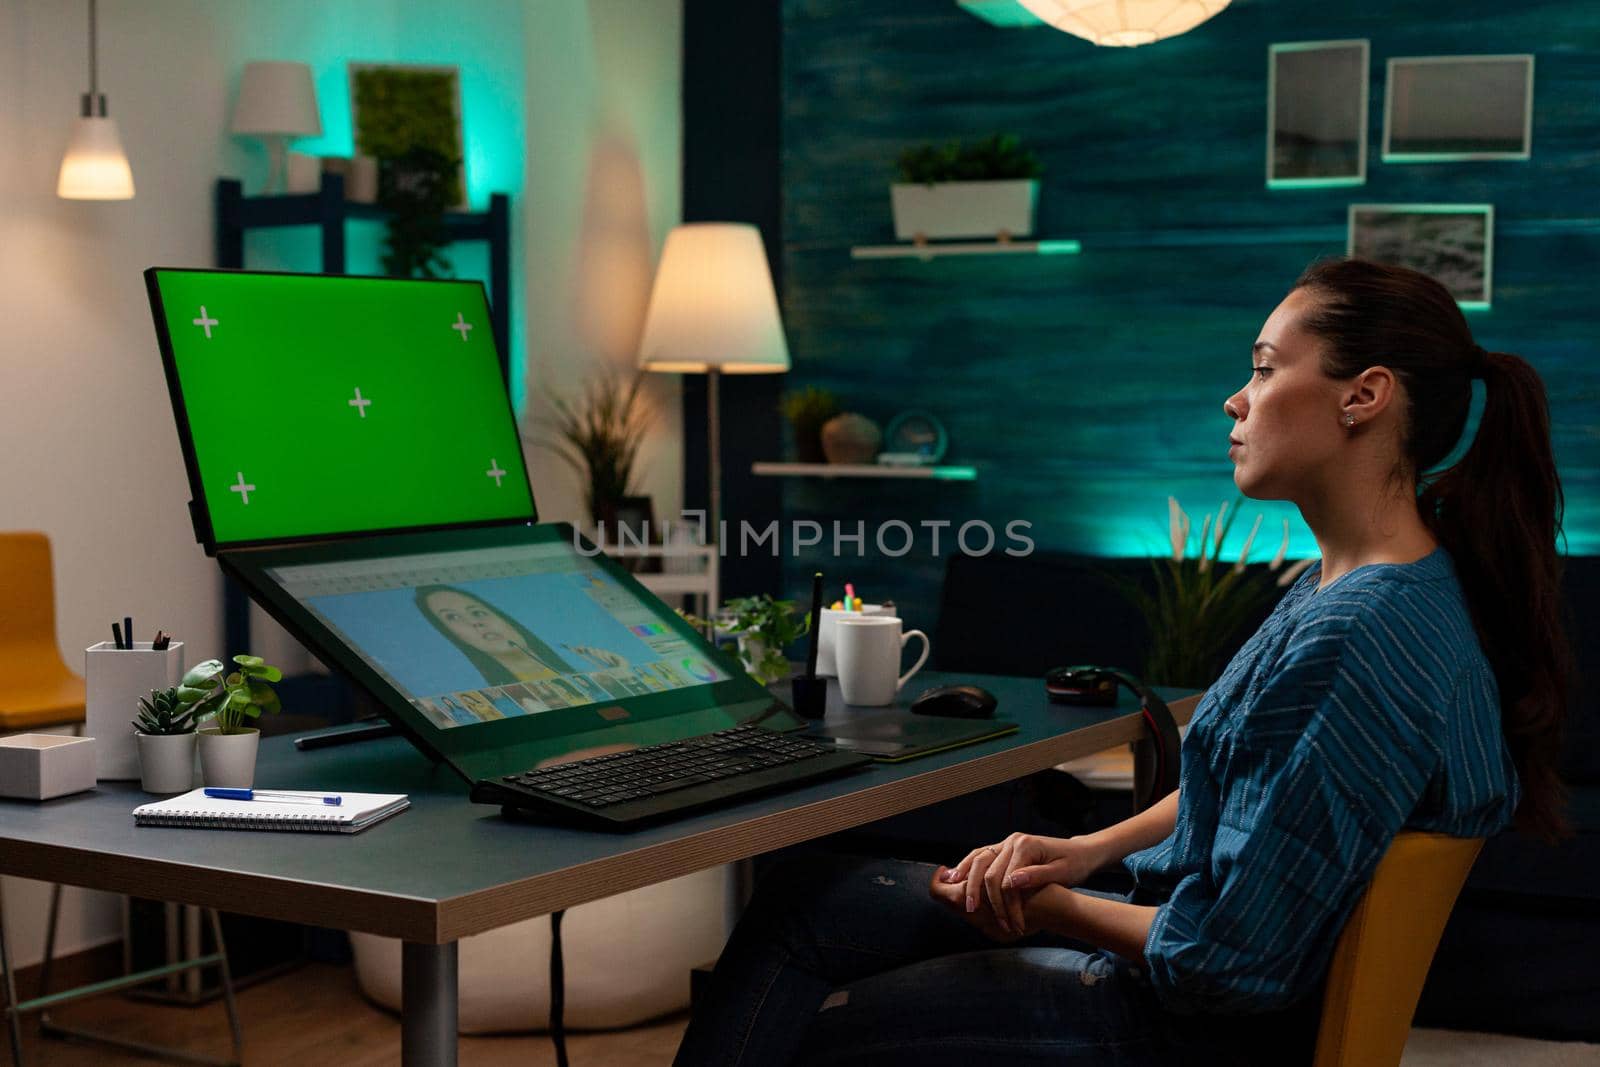 Professional photographer working with green screen and editing photo on touch display computer. Artist woman retouching project, digital chroma key, mockup template on desktop office